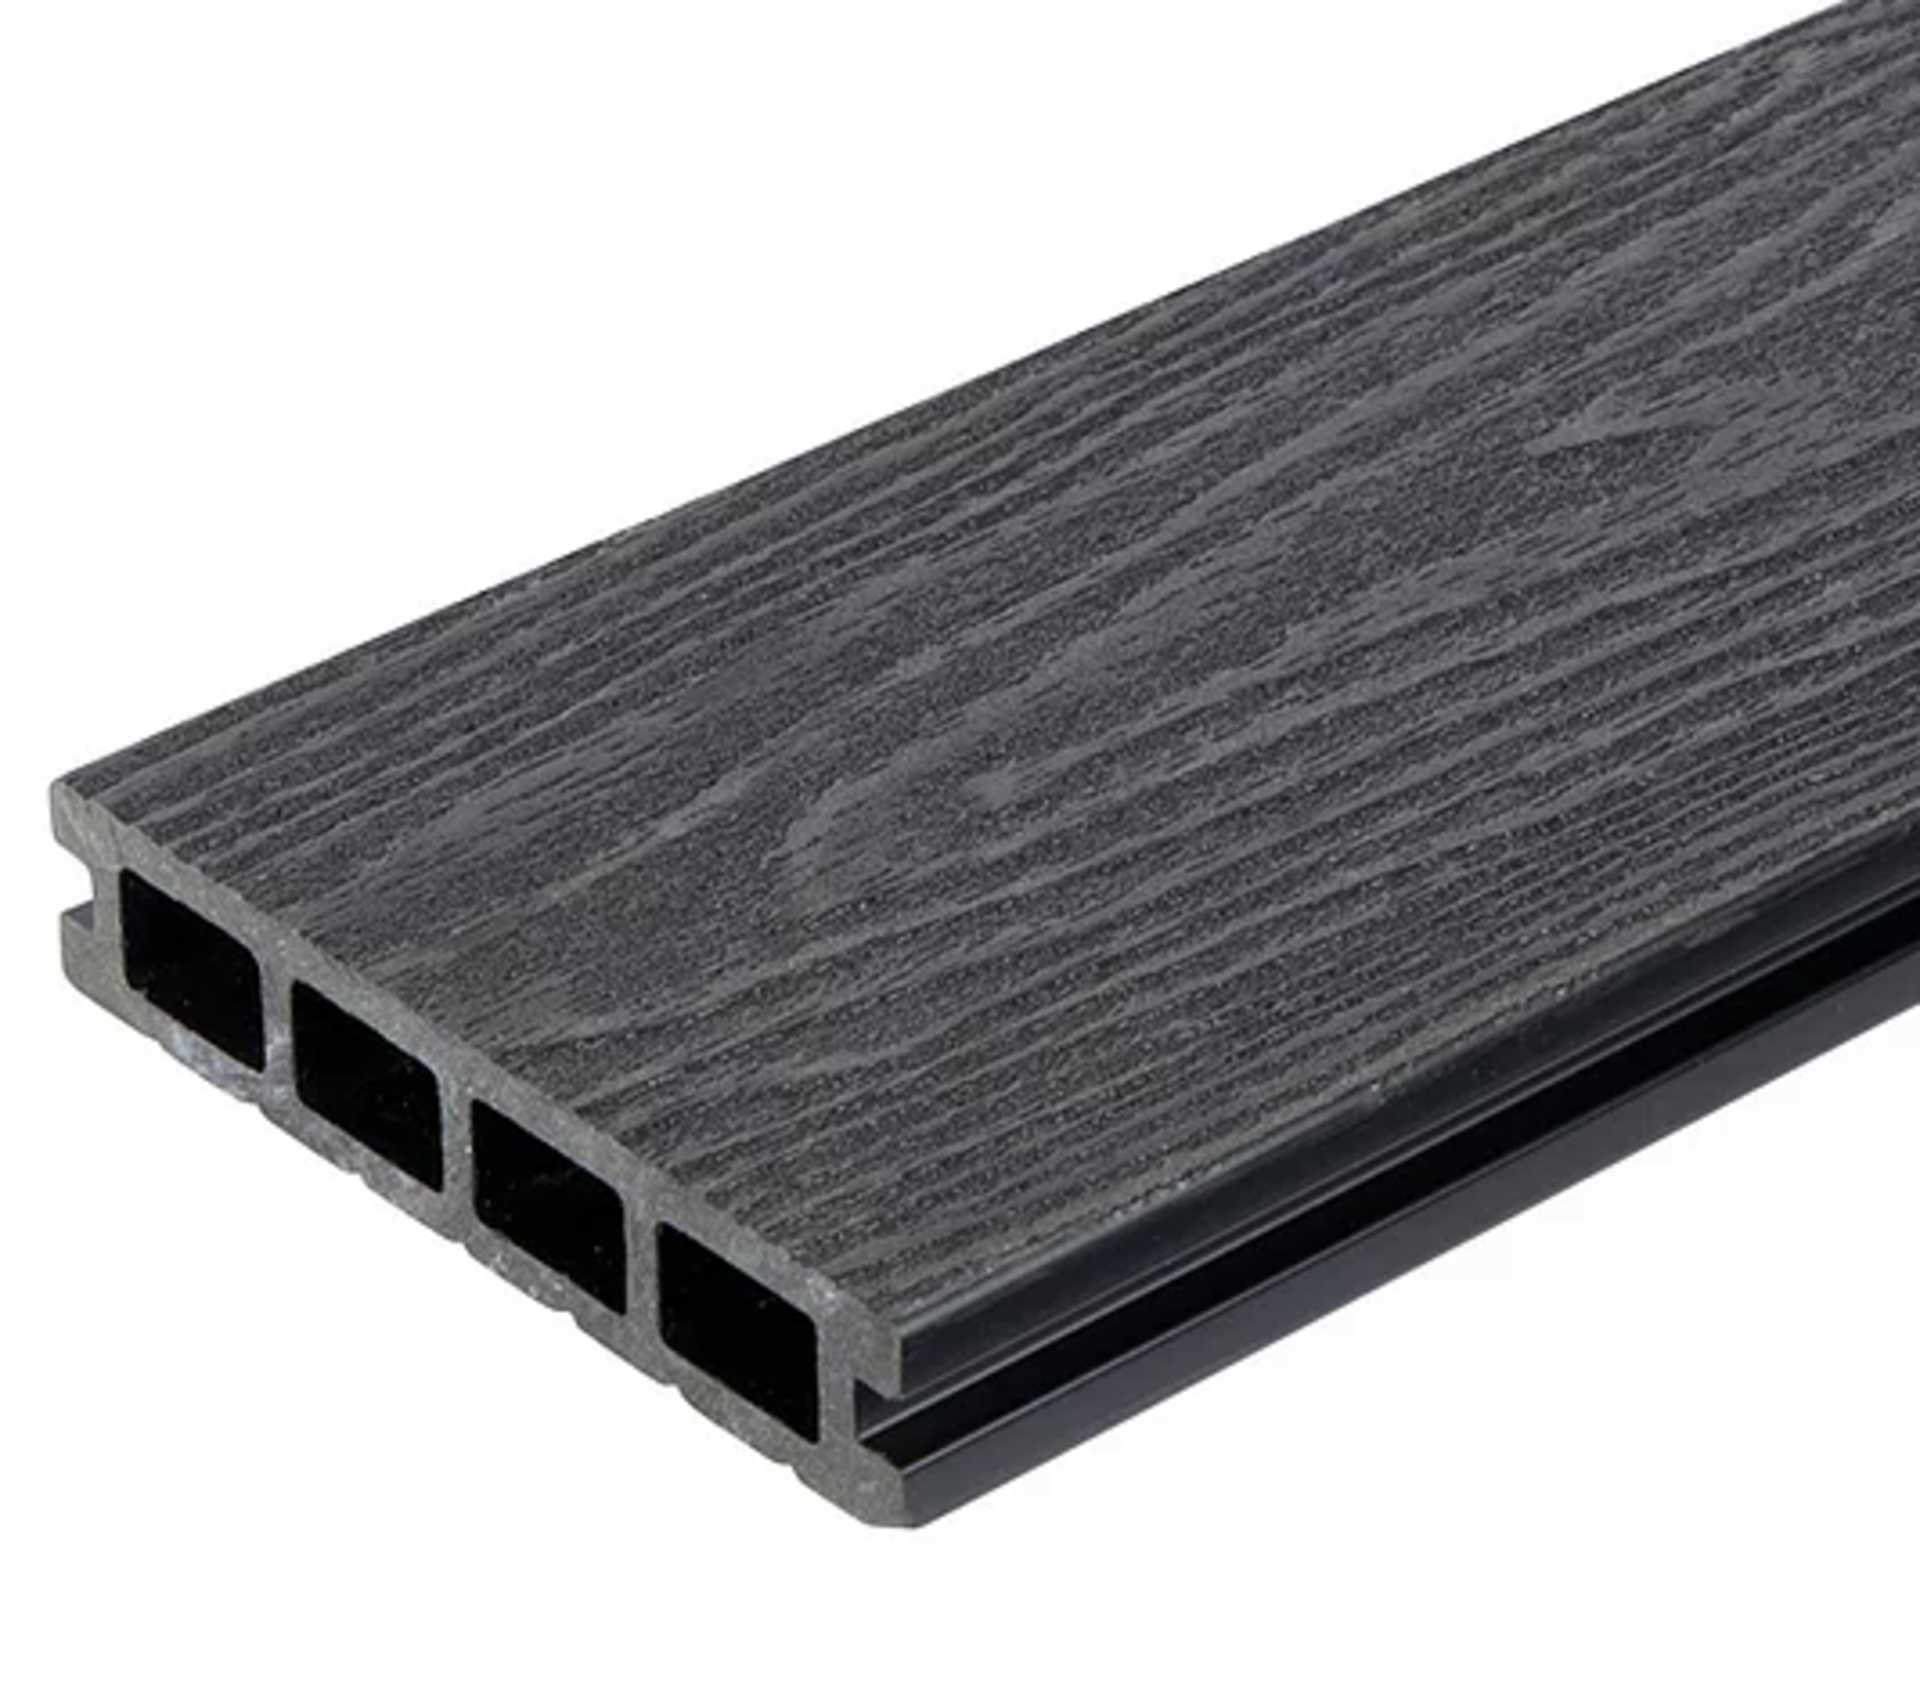 * 20 WPC Composite Dark Grey Double sided Embossed Woodgrain Decking Boards 2900mm x 146mm x 25mm - Image 2 of 4